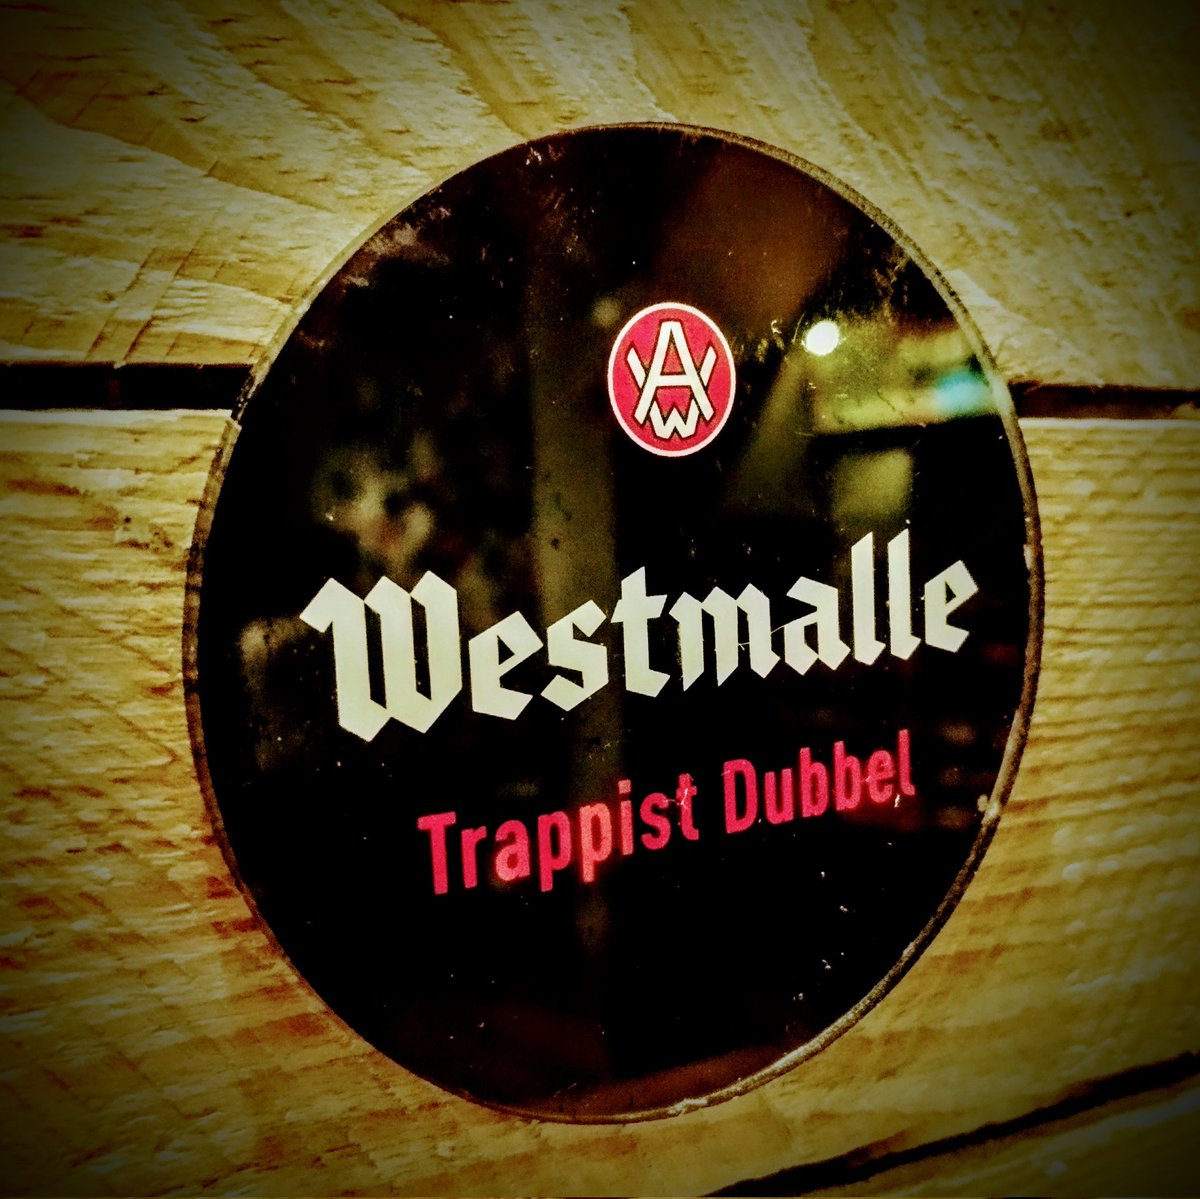 It's been a while, but one of our favourite Trappist dubbels is back on tap... Dark, decadent, rich and comforting! Open at 4pm 👍 #colwynbay #alehouse #pub